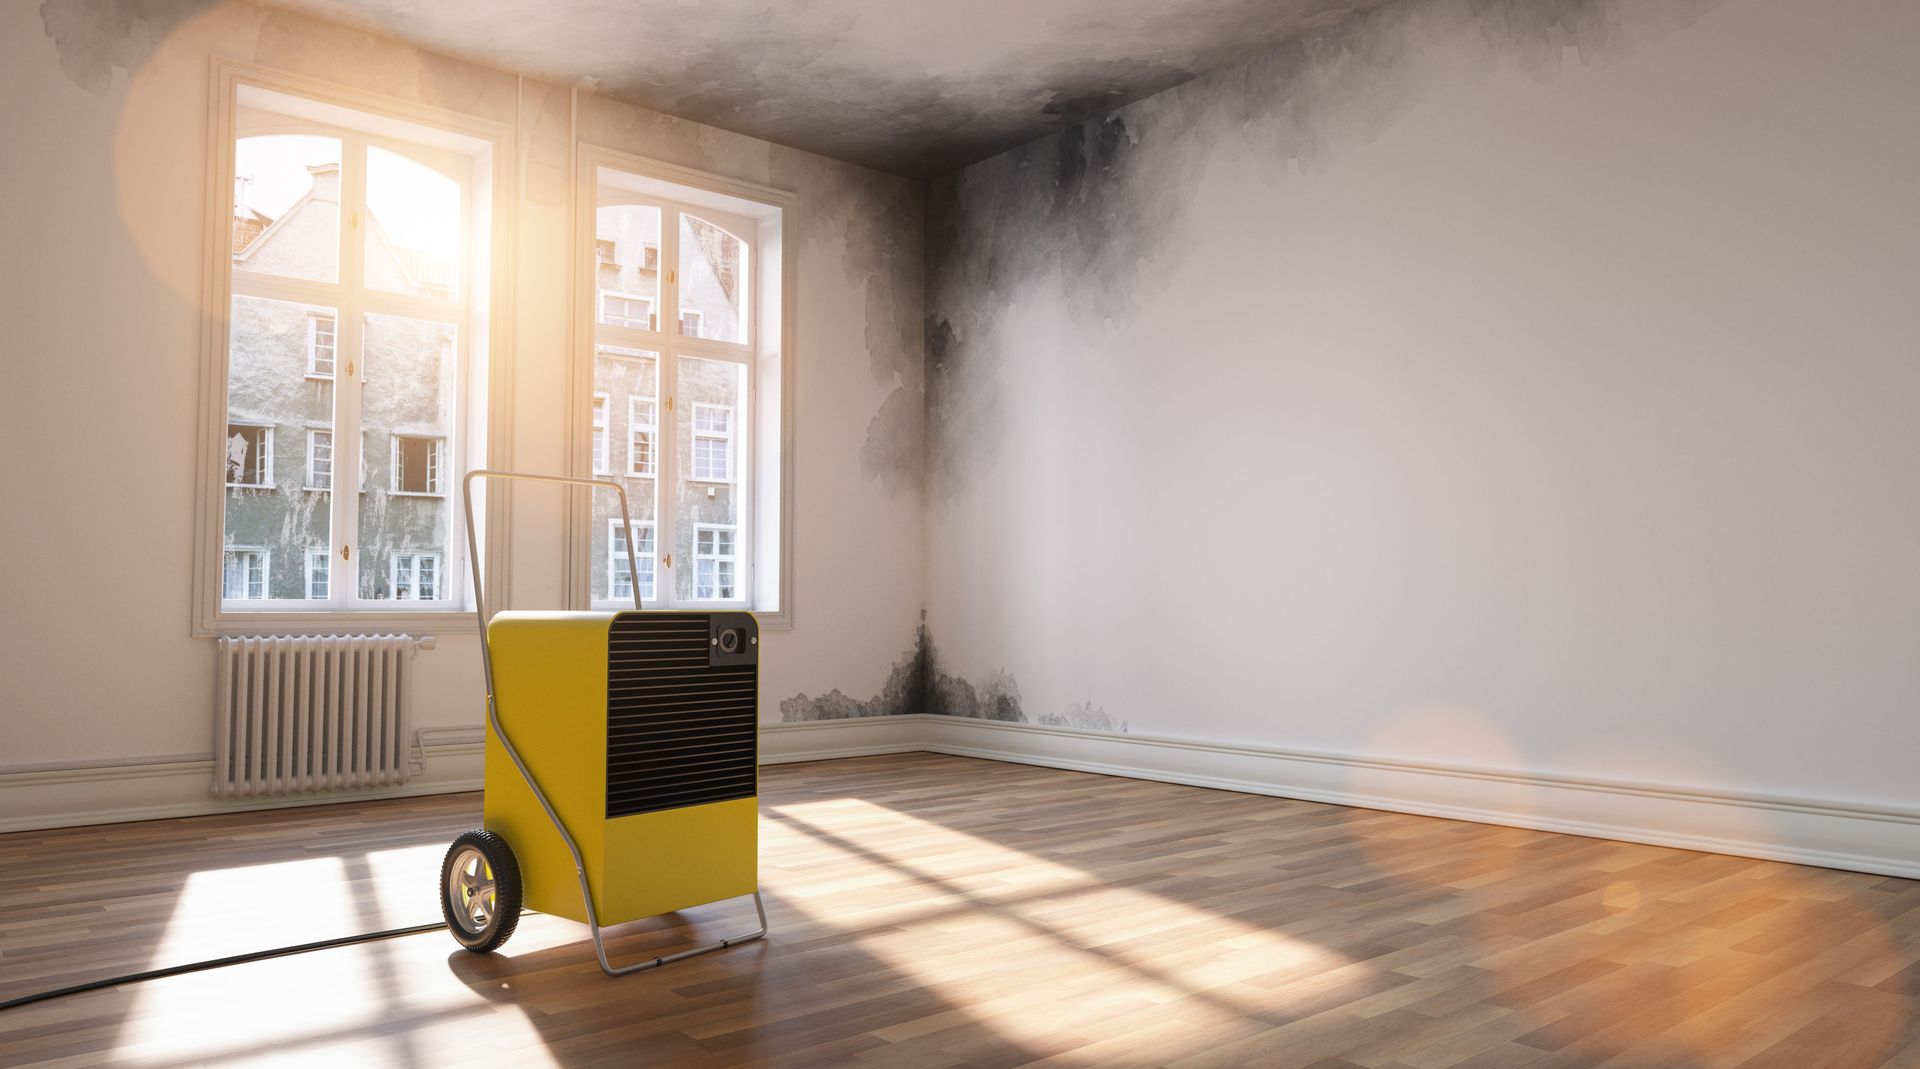 professional dehumidifier after water damage standing